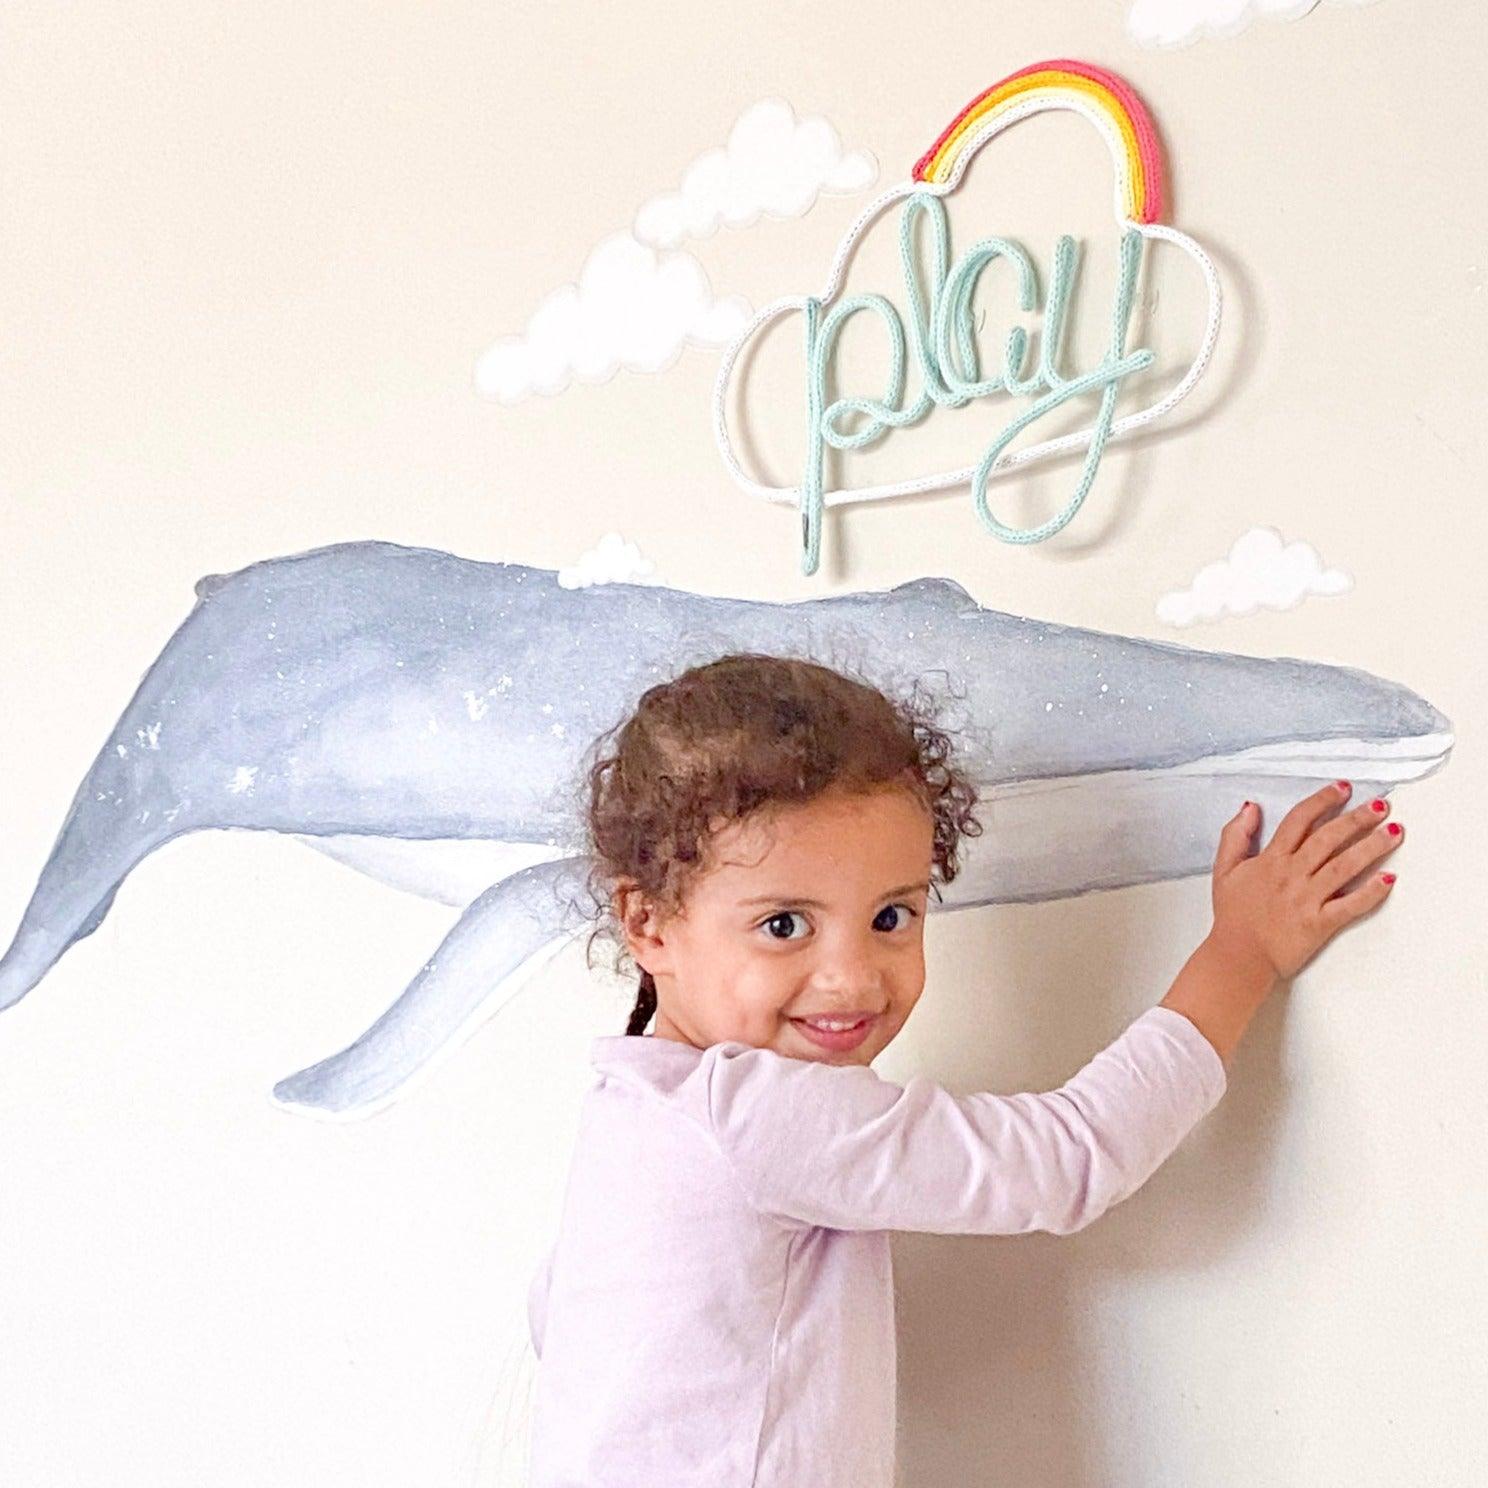 Magical Blue Whale - Removable Fabric Wall Sticker - lovefrankieart